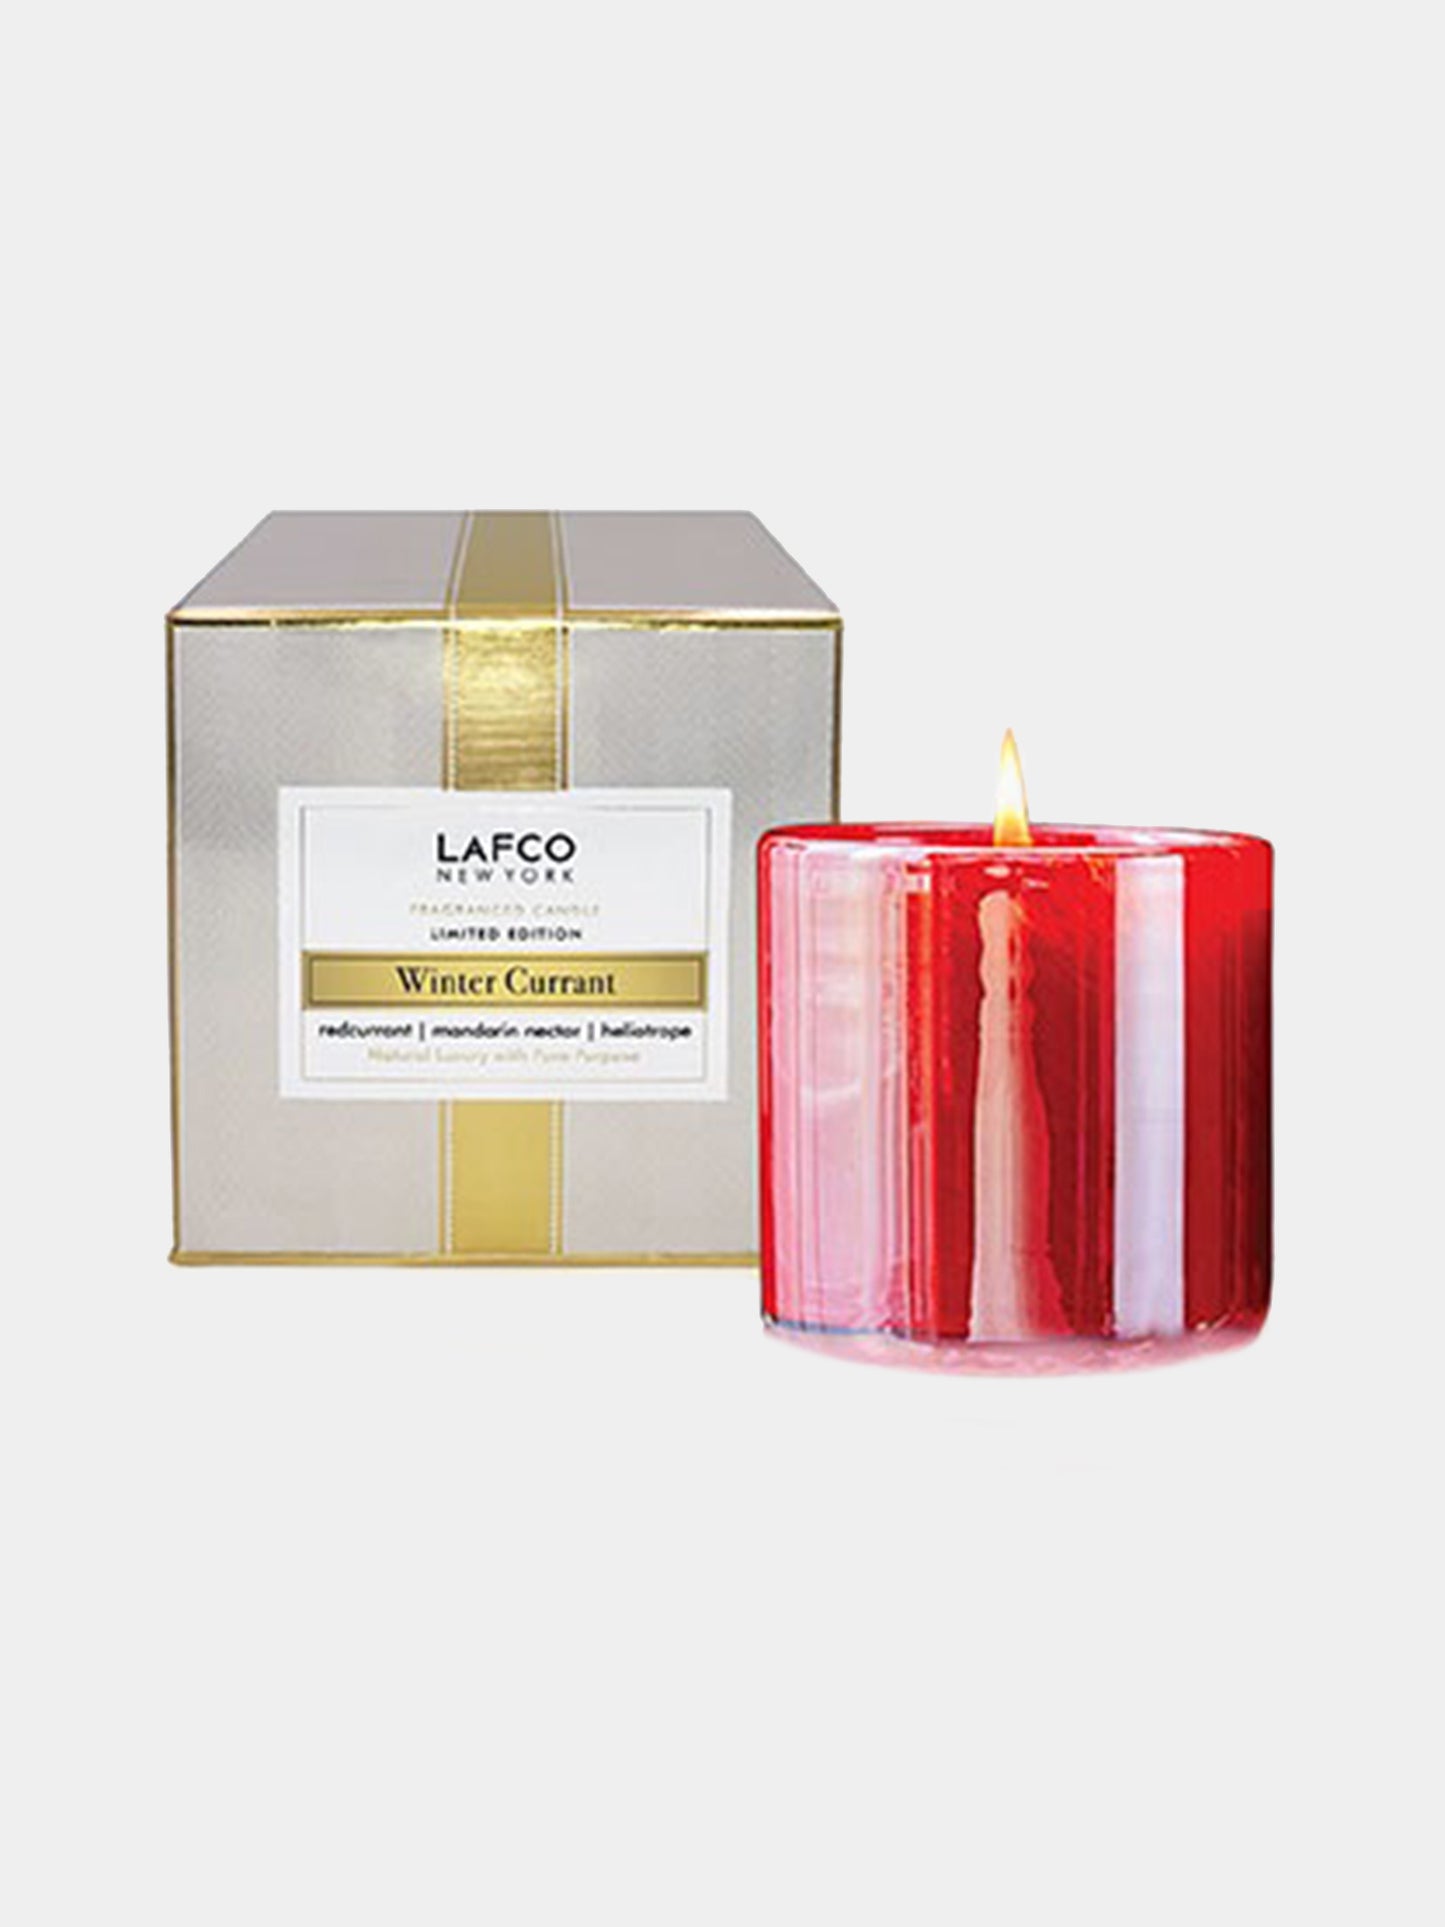 LAFCO Winter Currant Classic Candle 6.5OZ